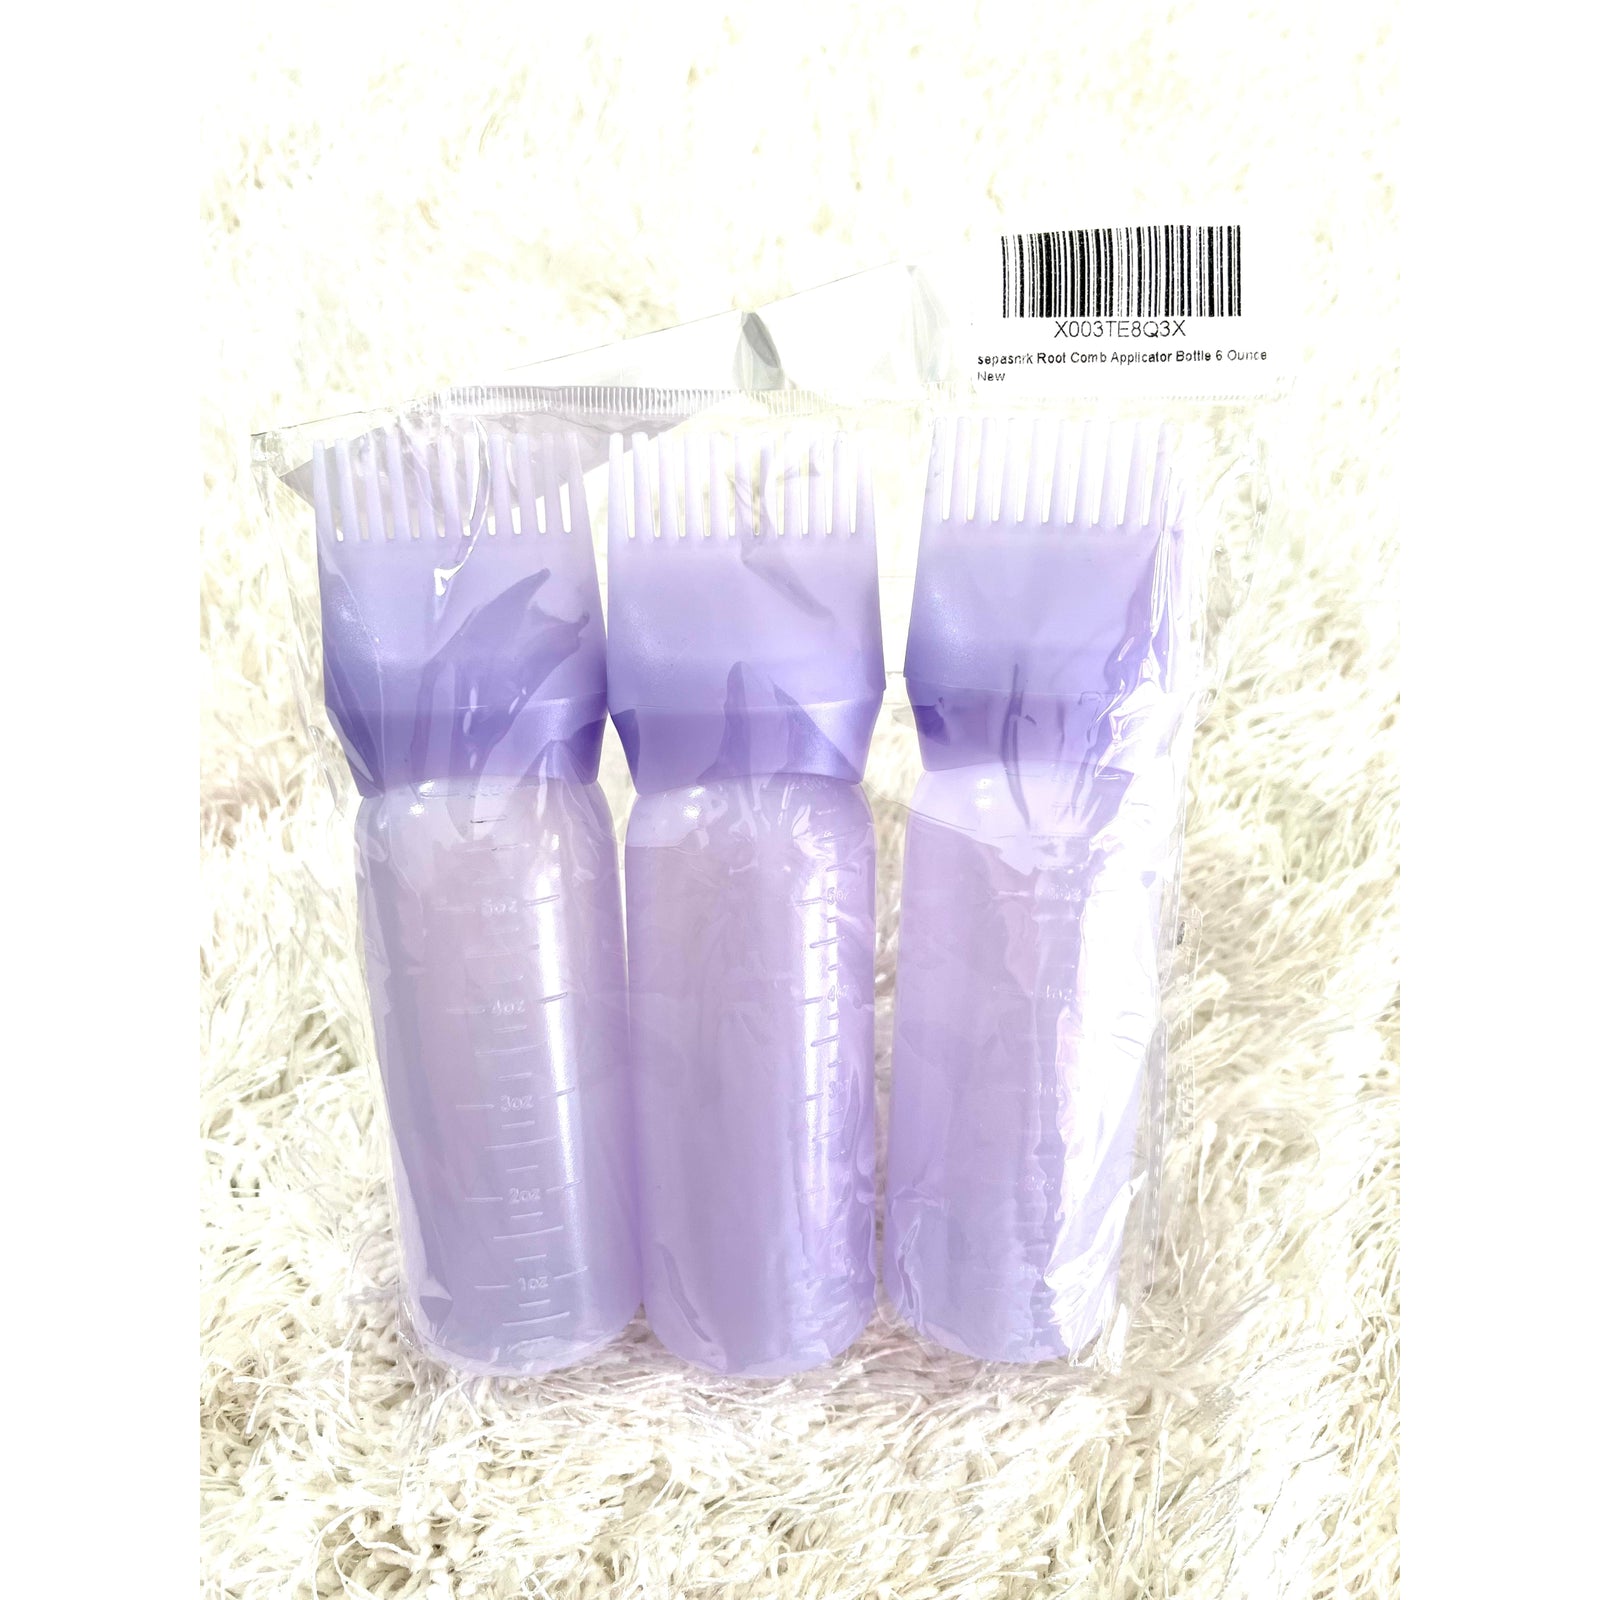 Root Comb Applicator Bottle 3 pack NEW